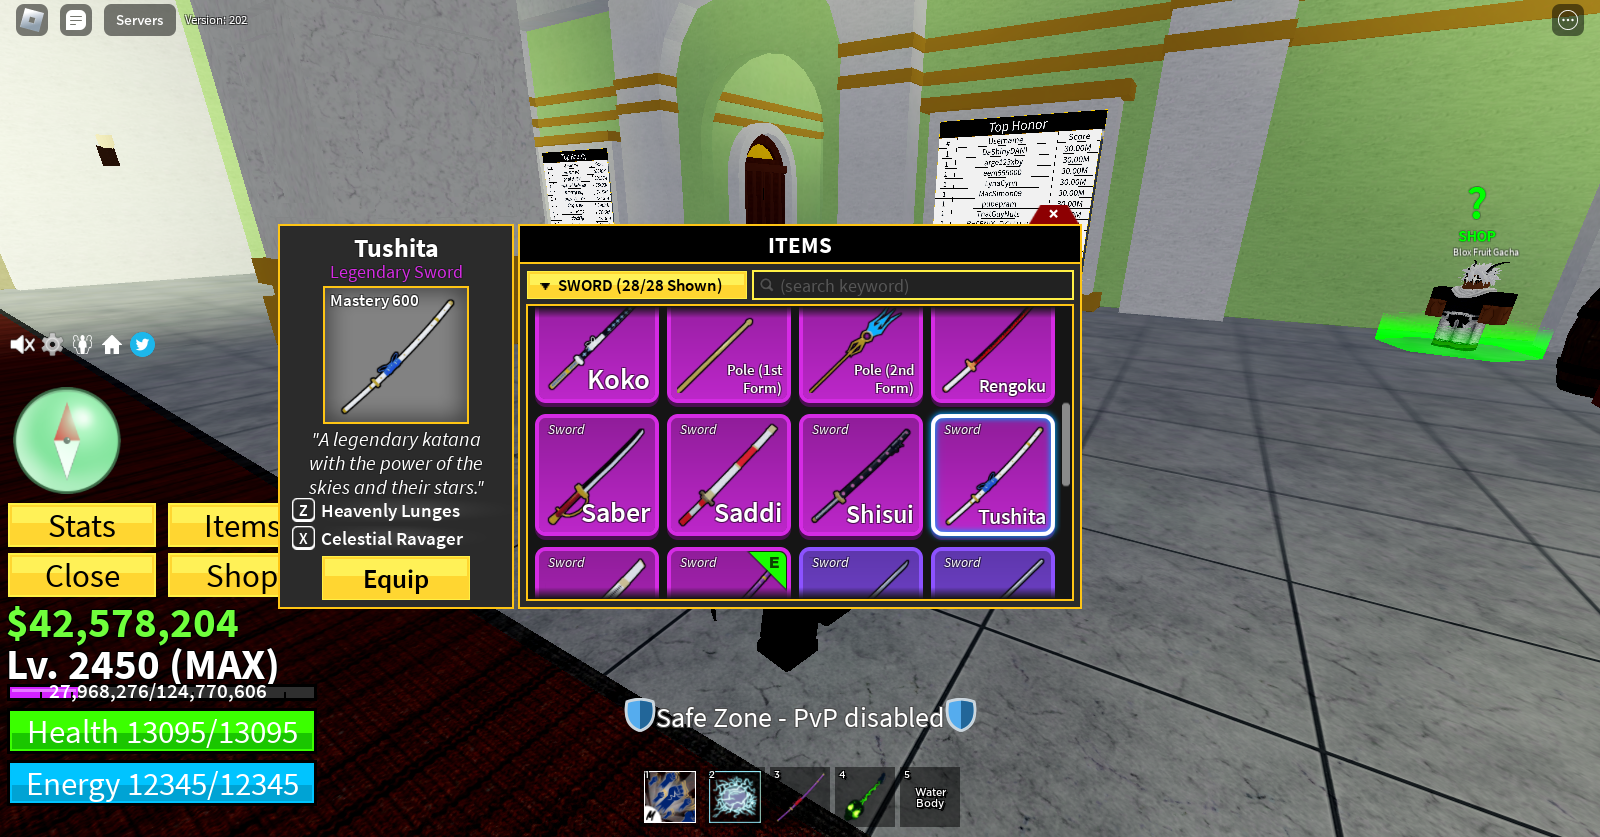 SOLD - Top Tier Handmade Blox Fruits Account 100% Game Completed - $1000  (Negotiable) - EpicNPC